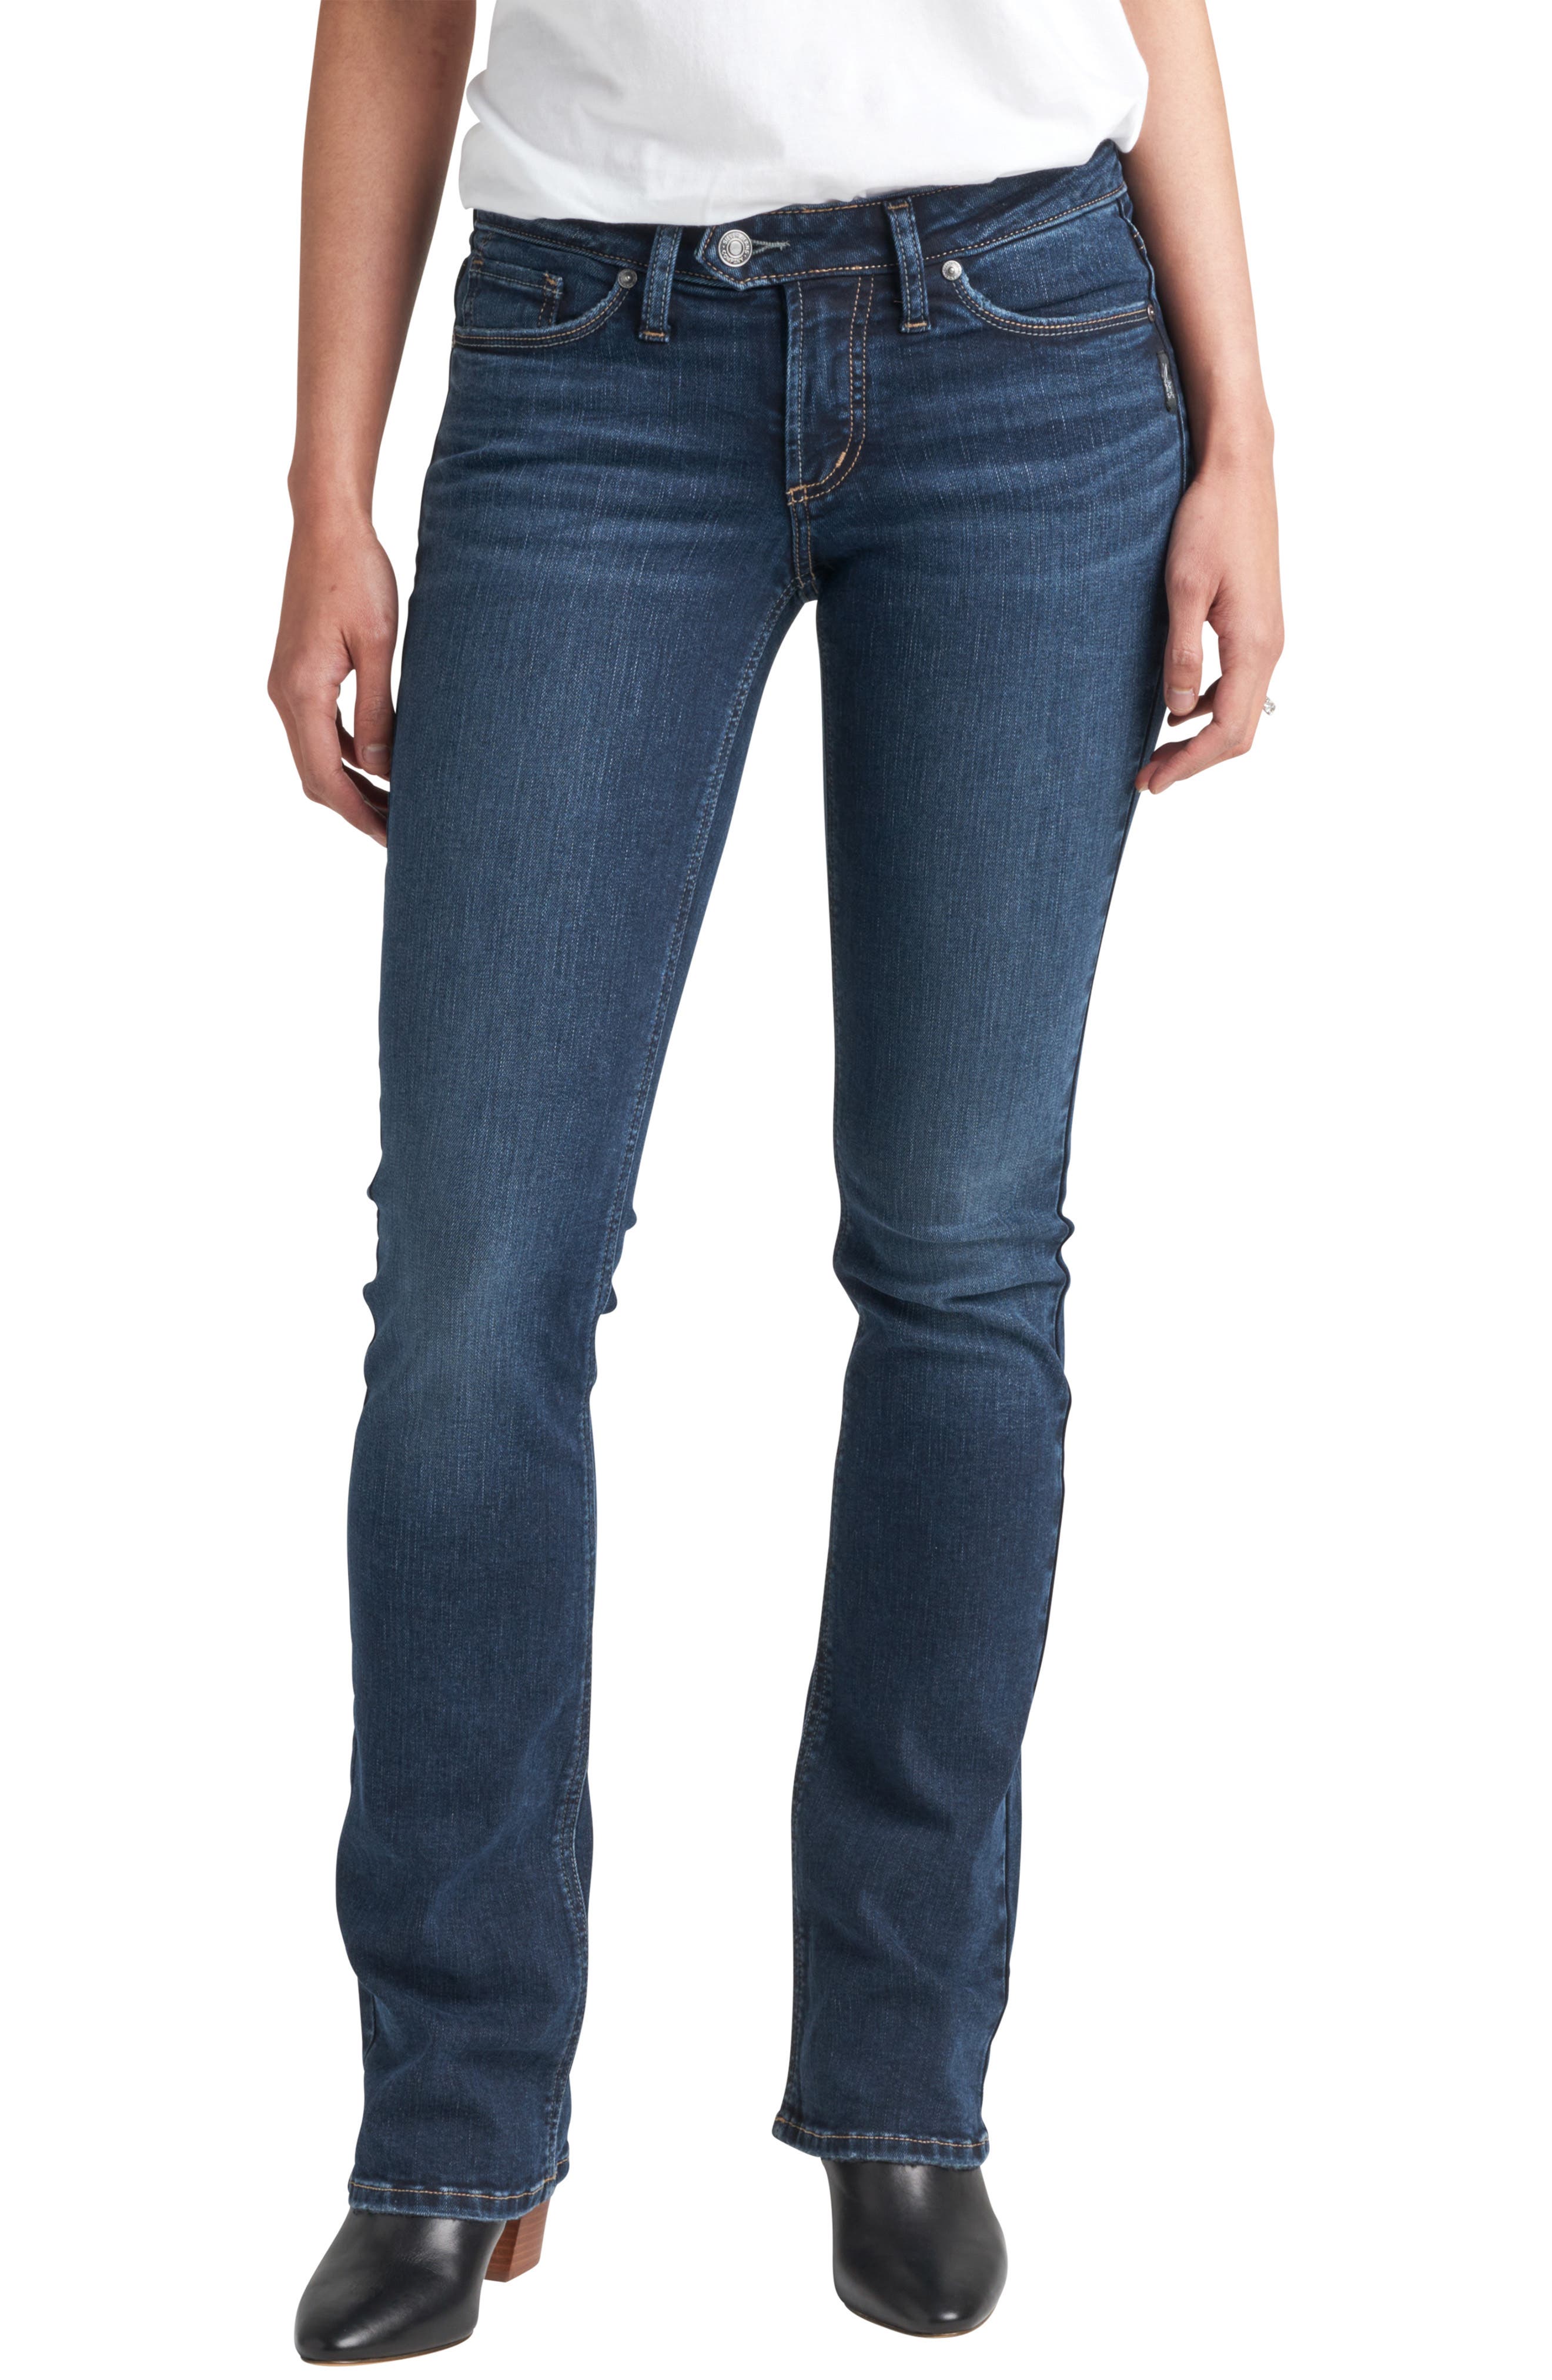 Silver Jeans Co. Tuesday Low Rise Slim Bootcut Jeans in Indigo